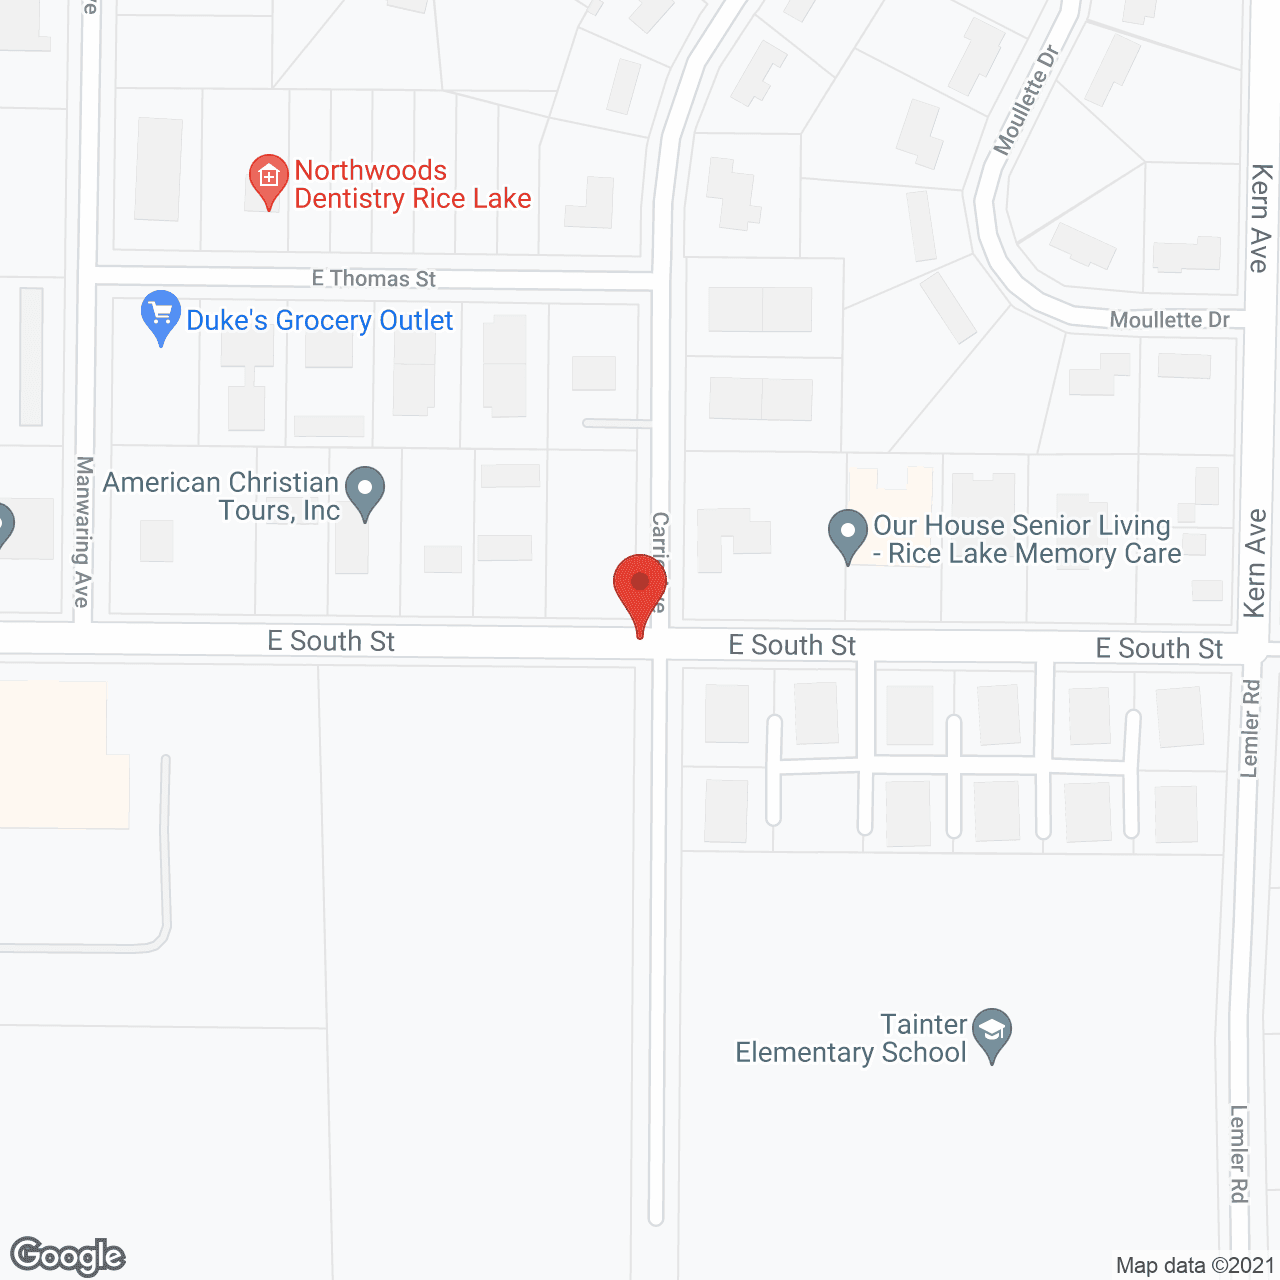 Our House Senior Living Memory Care - Rice Lake in google map